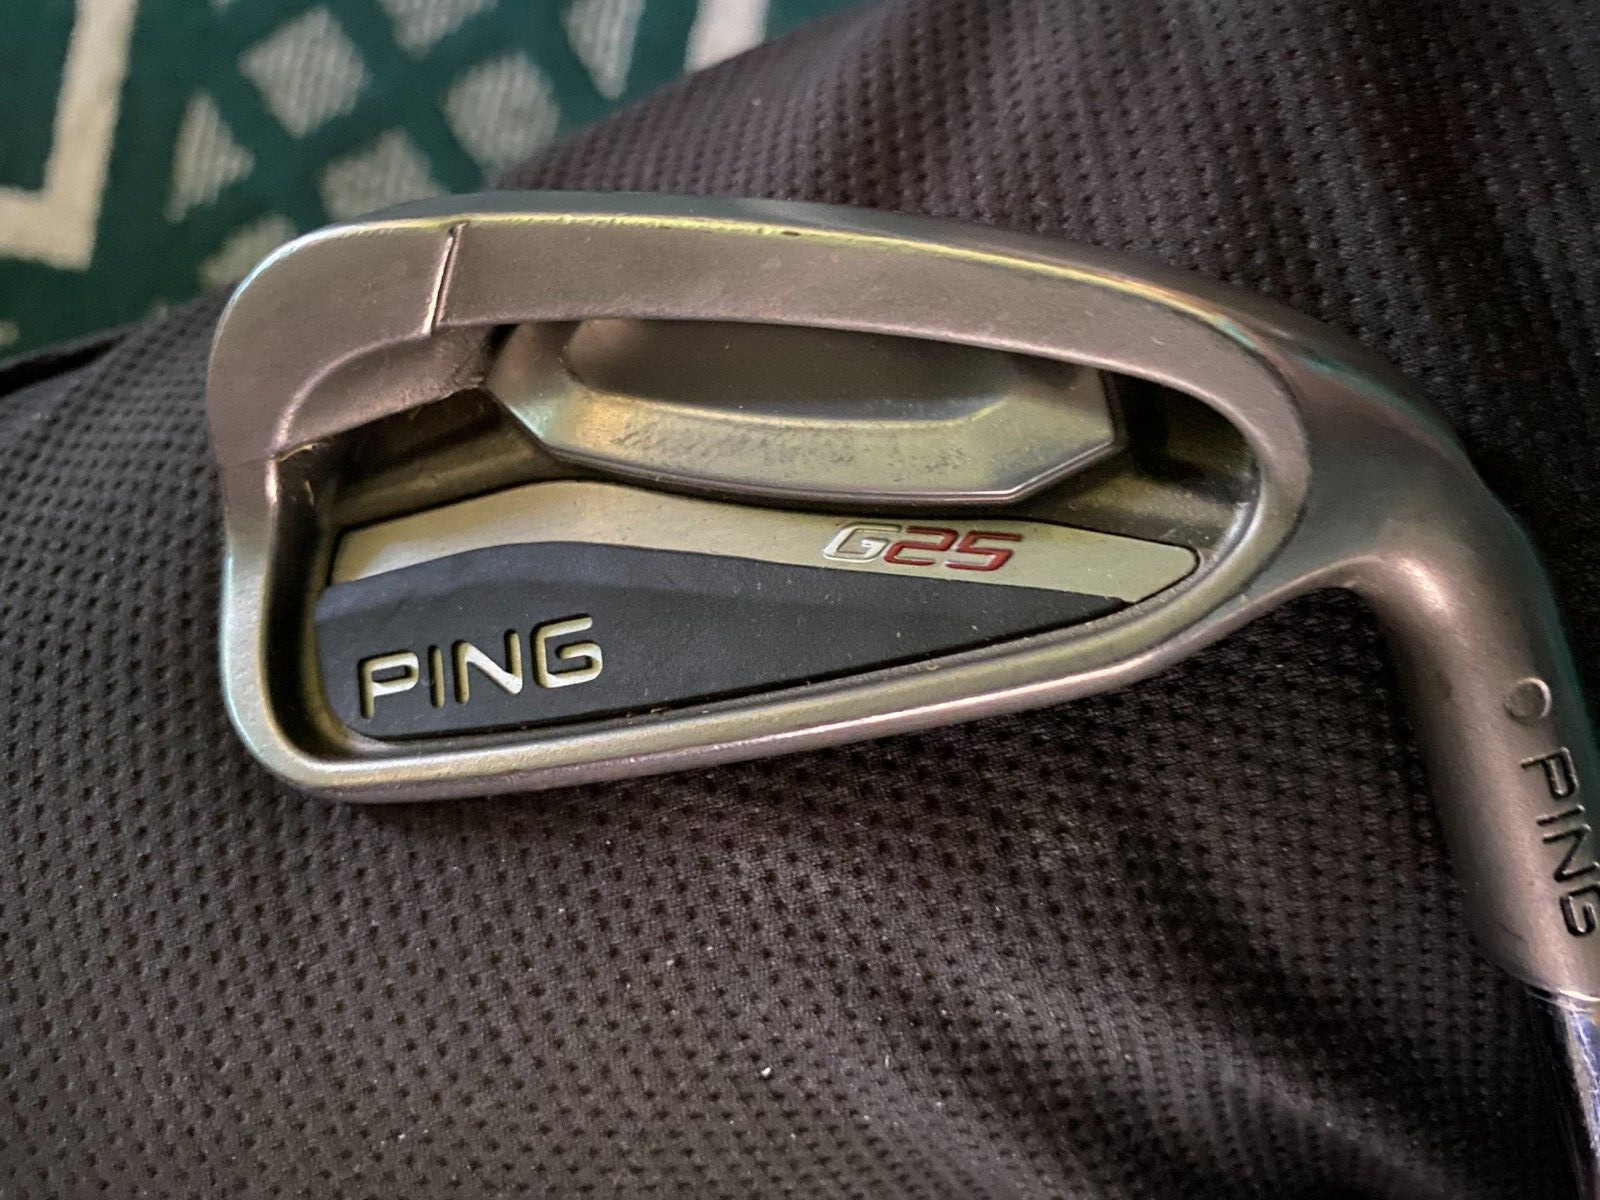 PING G 25 irons 5-PW ( 6 clubs), white dot, +1 inch, midsize grips, stiff shafts